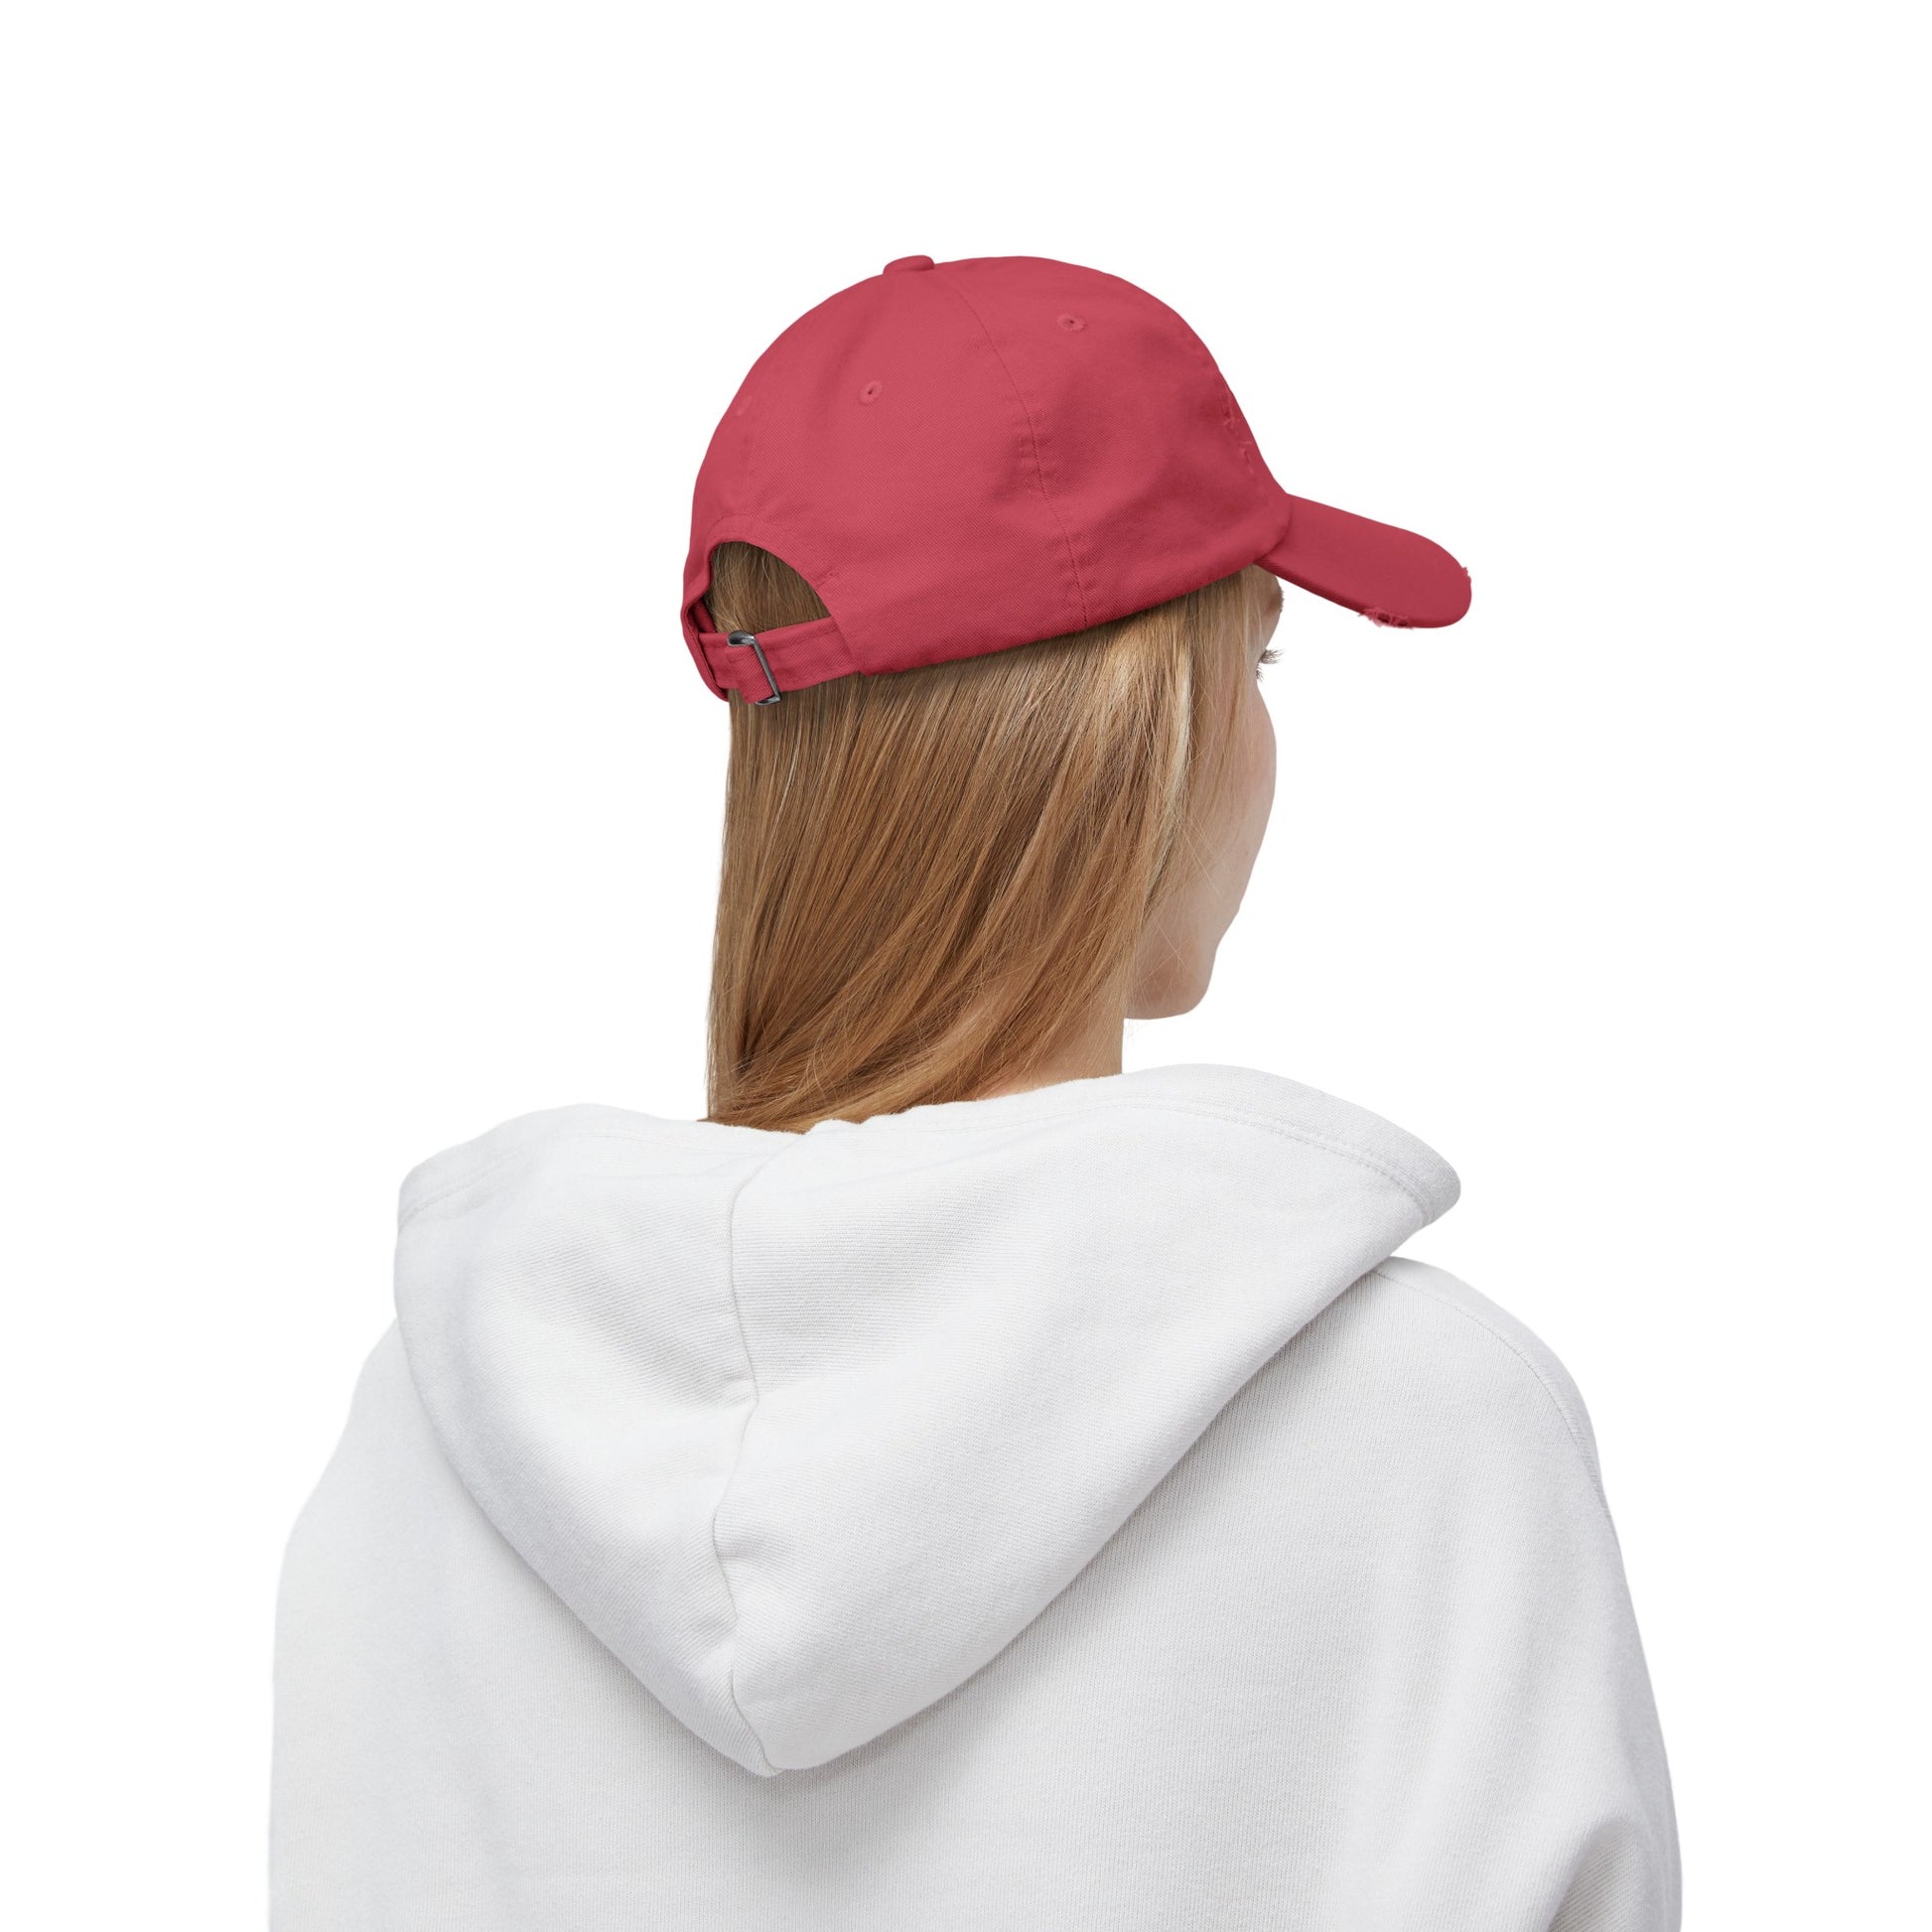 a woman wearing a red hat and a white sweatshirt